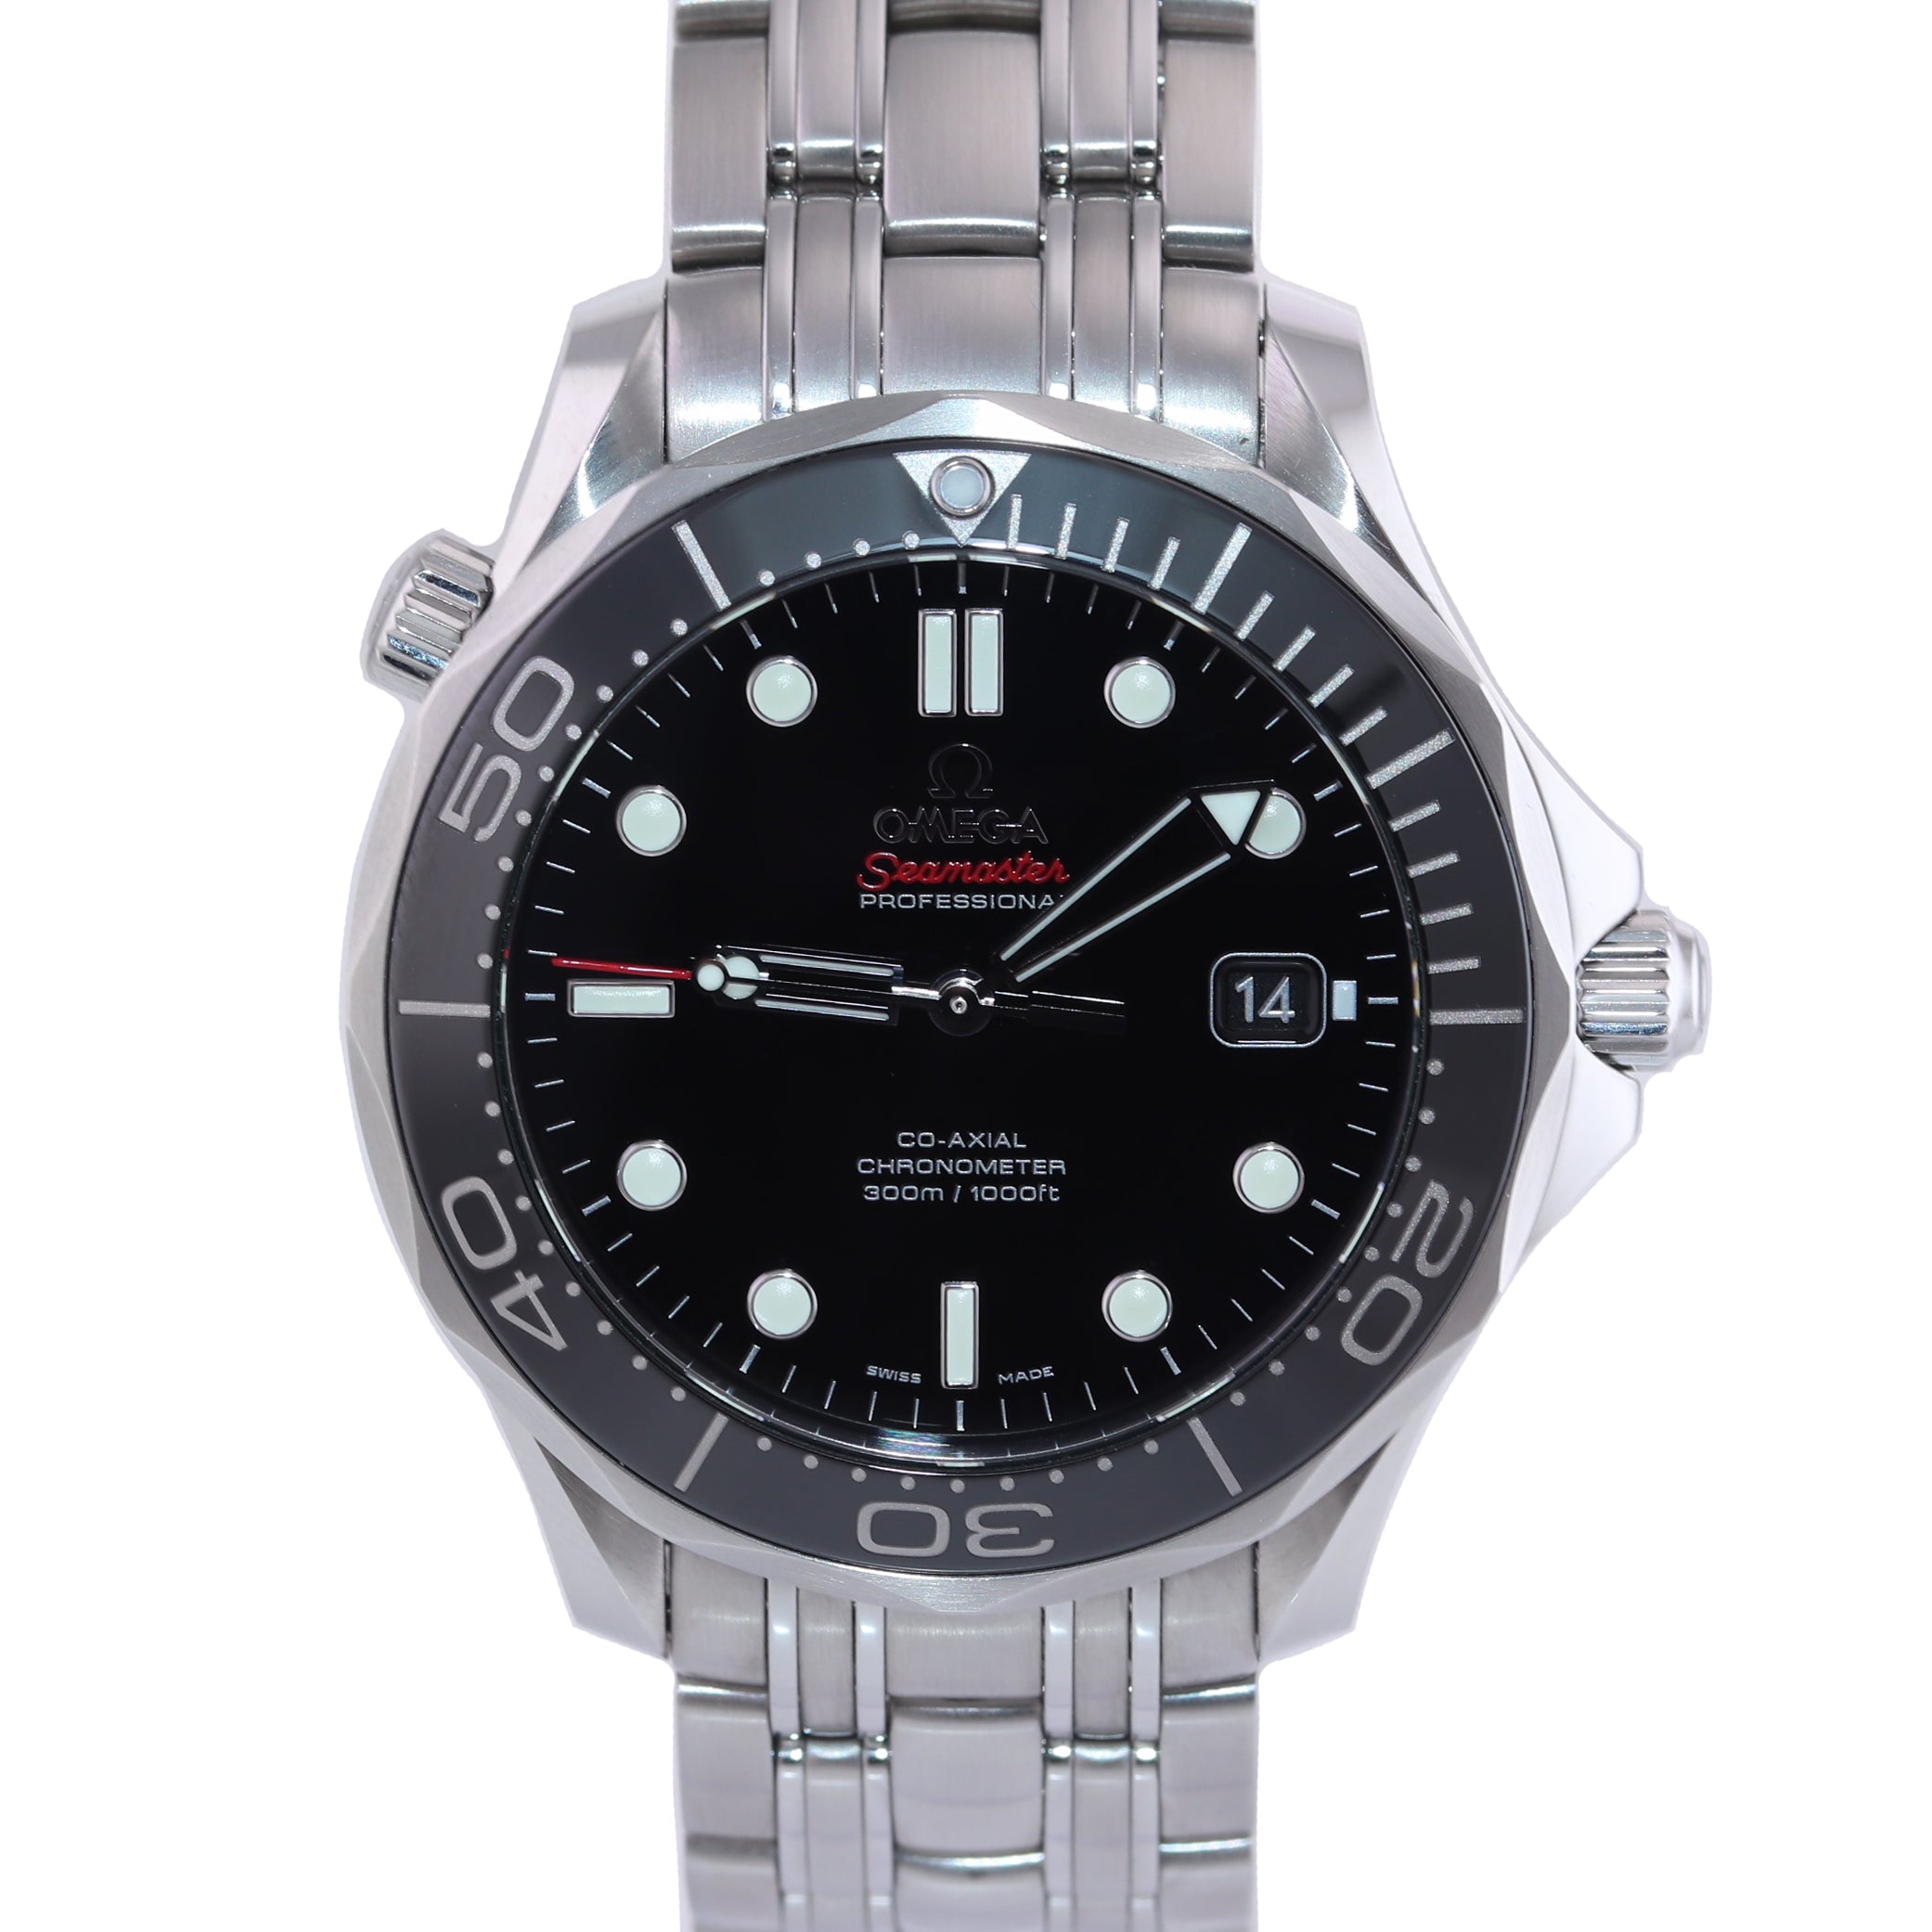 MINT Omega Seamaster Black Co-Axial 300M 212.30.41.20.01.003 41mm Date Watch Box